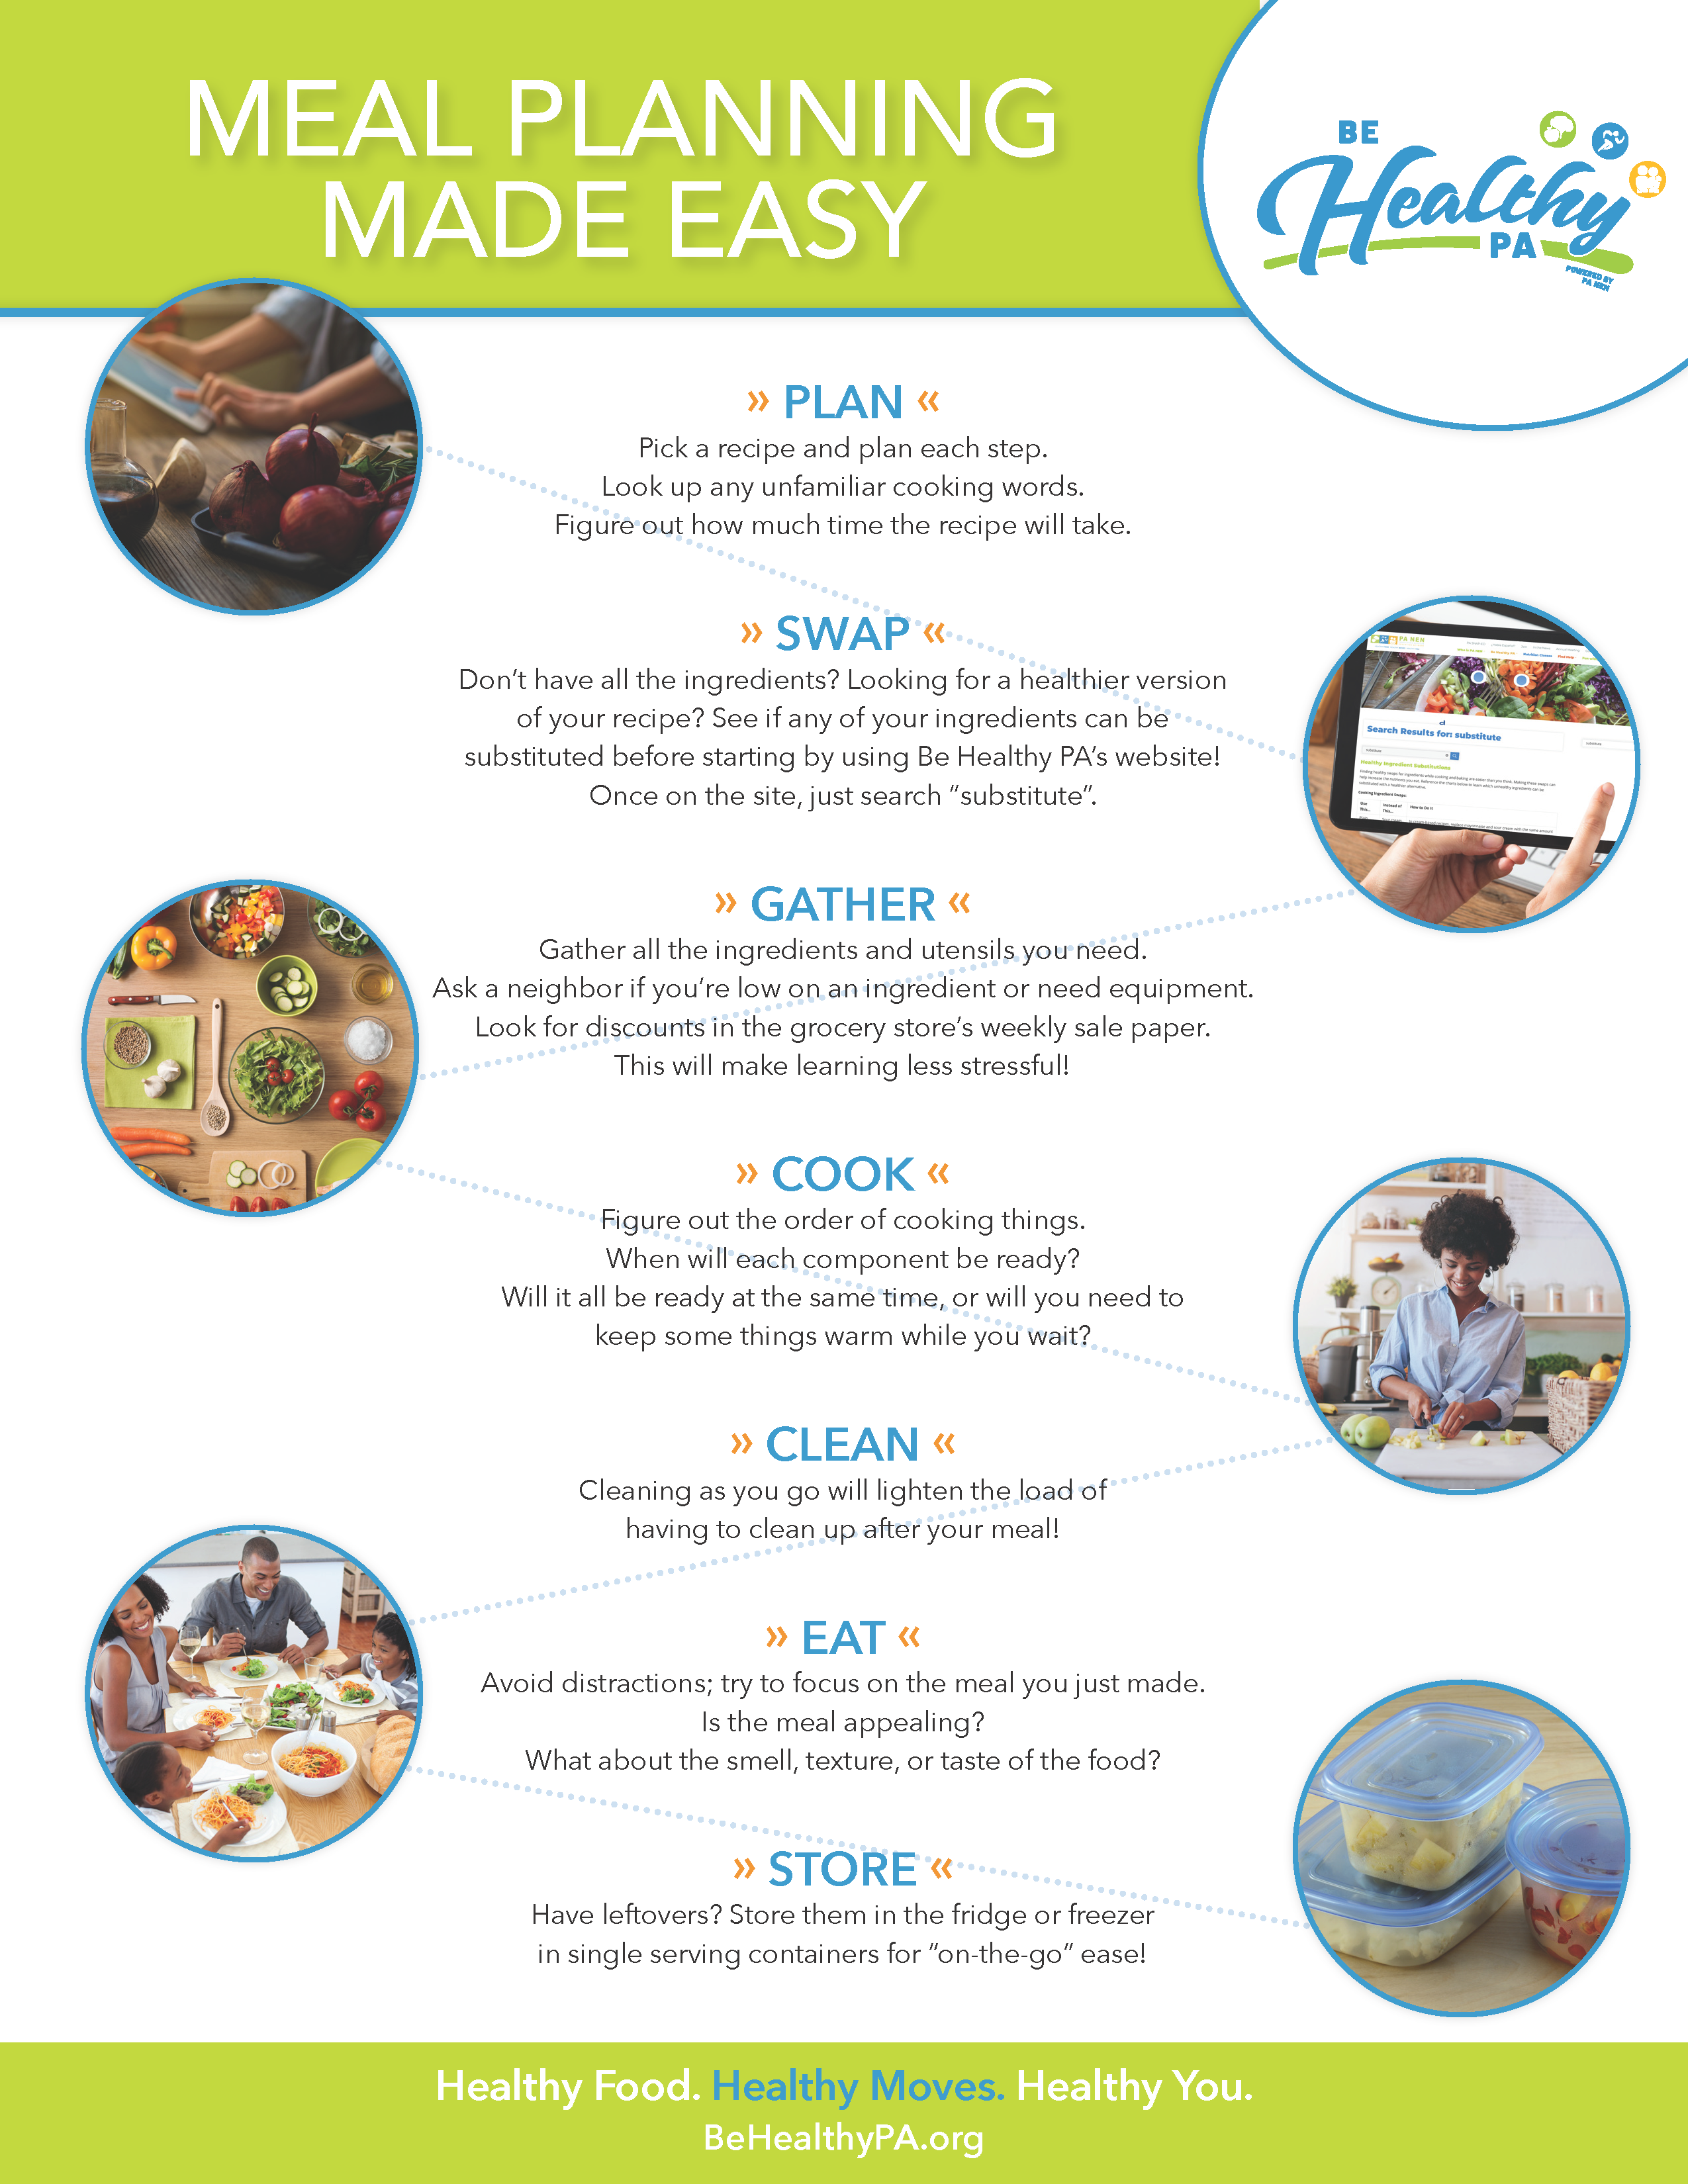 Health benefits of meal planning